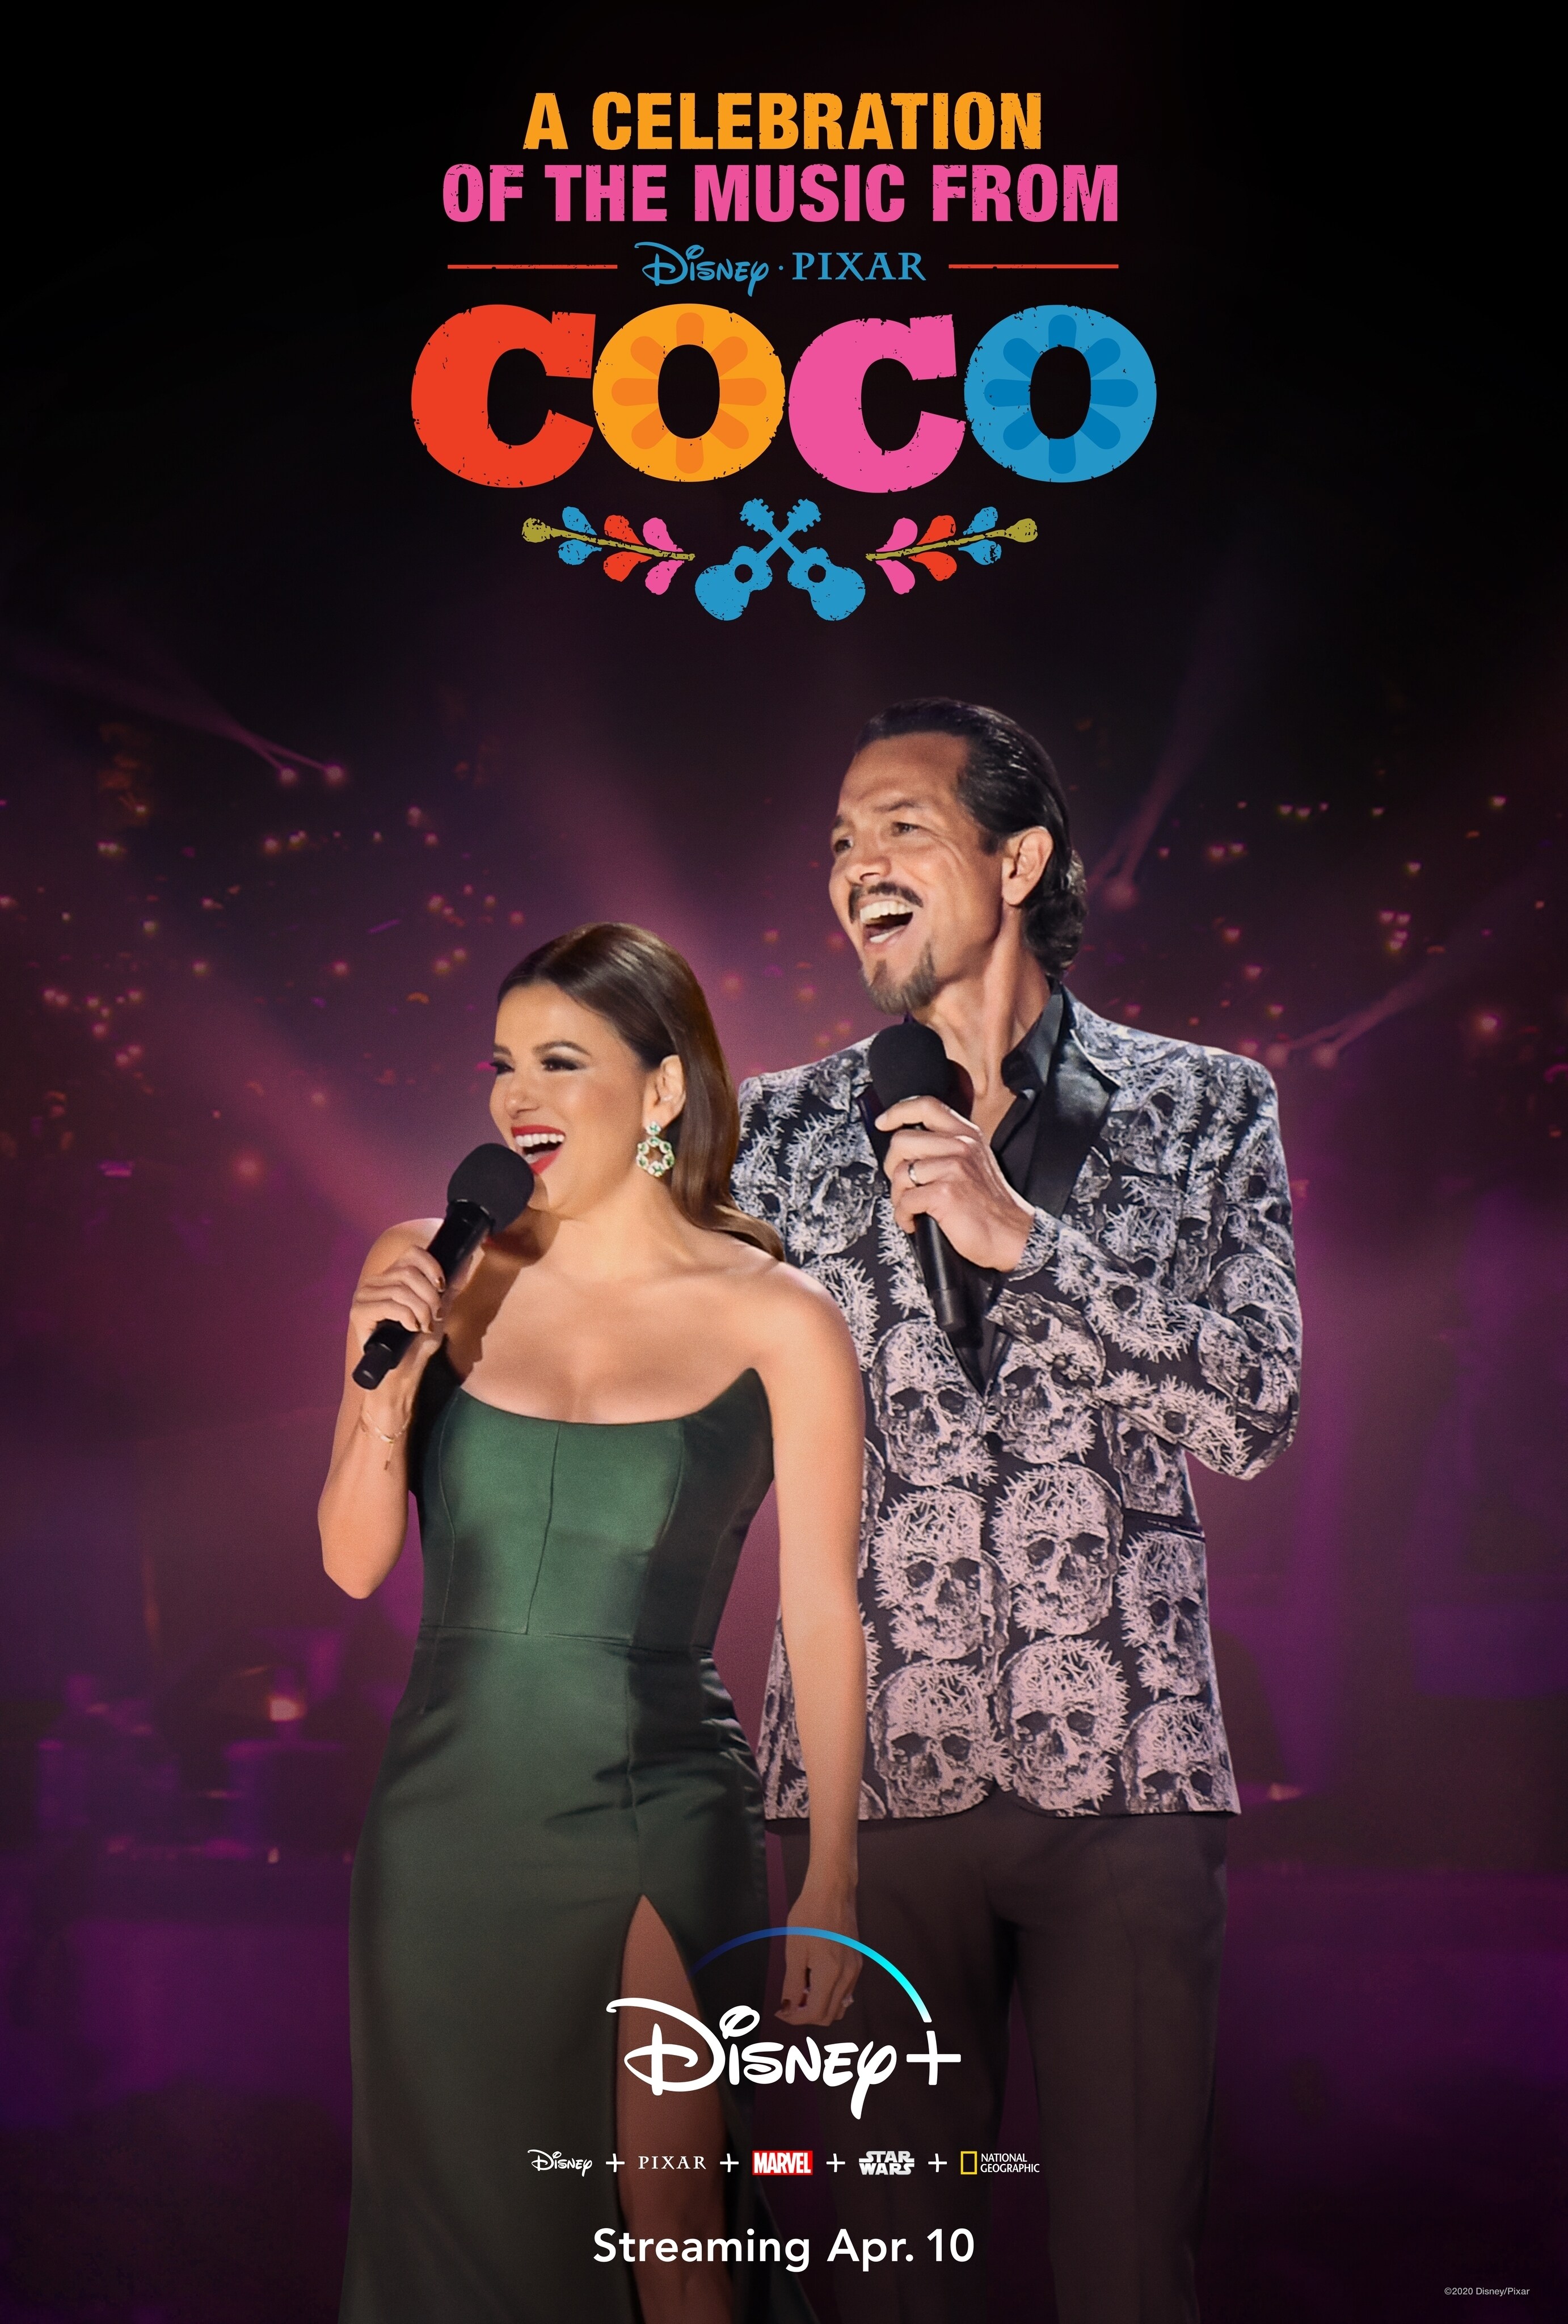 Coco Live-to-Film Concert – AMP WORLDWIDE